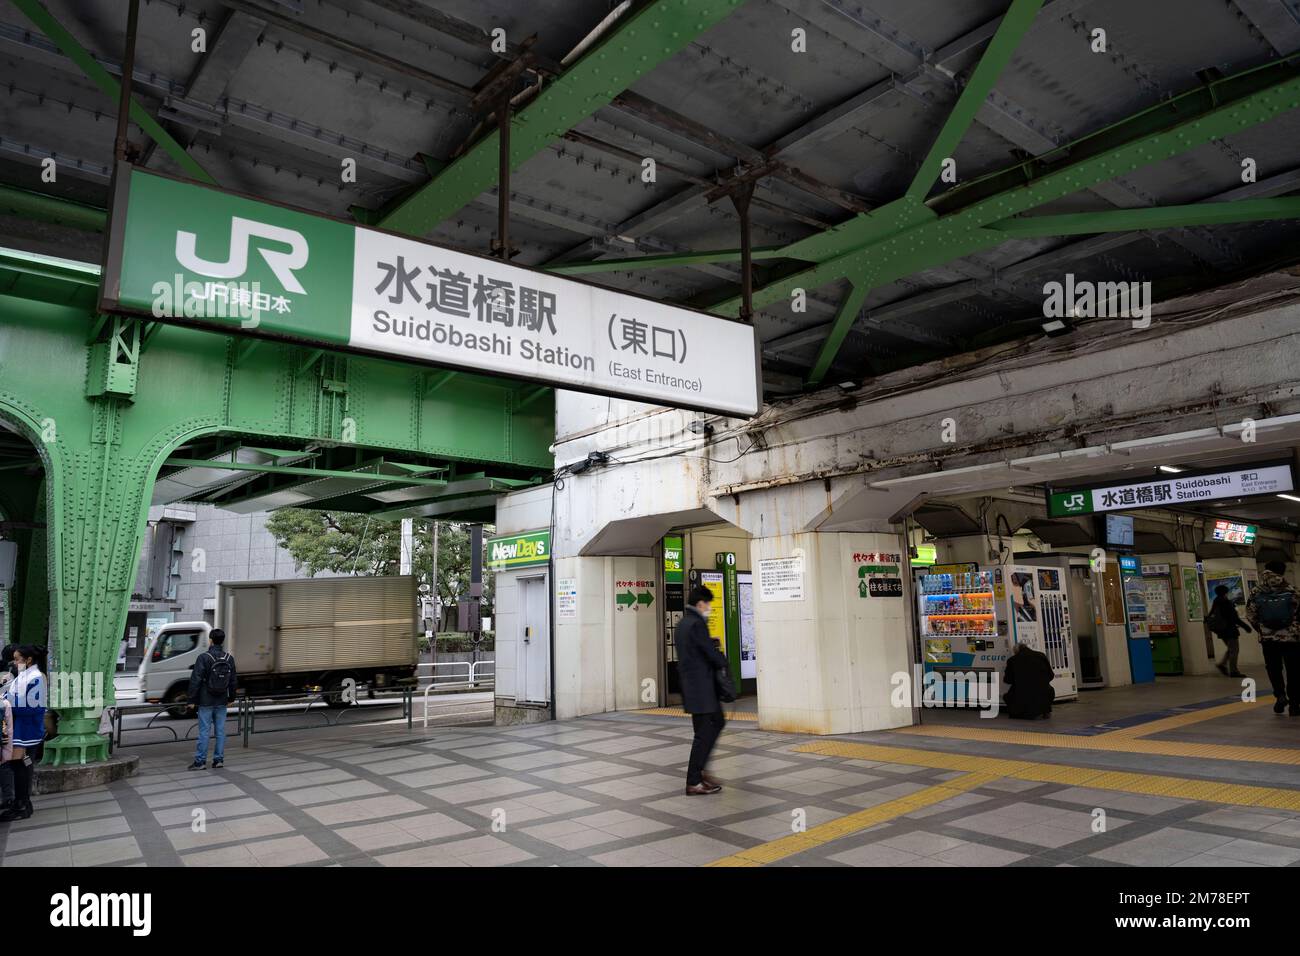 Tokyo, Japan. 6th Jan, 2023. JR Sudiobashi Station.The JR East Chuo Line is a railway line in Japan operated by East Japan Railway Company (JR East). It runs from Tokyo Station in central Tokyo to Takao Station in the west, passing through major cities such as Yokohama, Hachioji, and Ome. The Chuo Line is colored orange on JR East train maps and is known for its rapid service, with trains reaching speeds of up to 130 km/h. It is used by commuters and tourists for travel to popular destinations such as Mount Takao, the Tama area, and the Fuji Five Lakes region. The Chuo Line also connects t Stock Photo